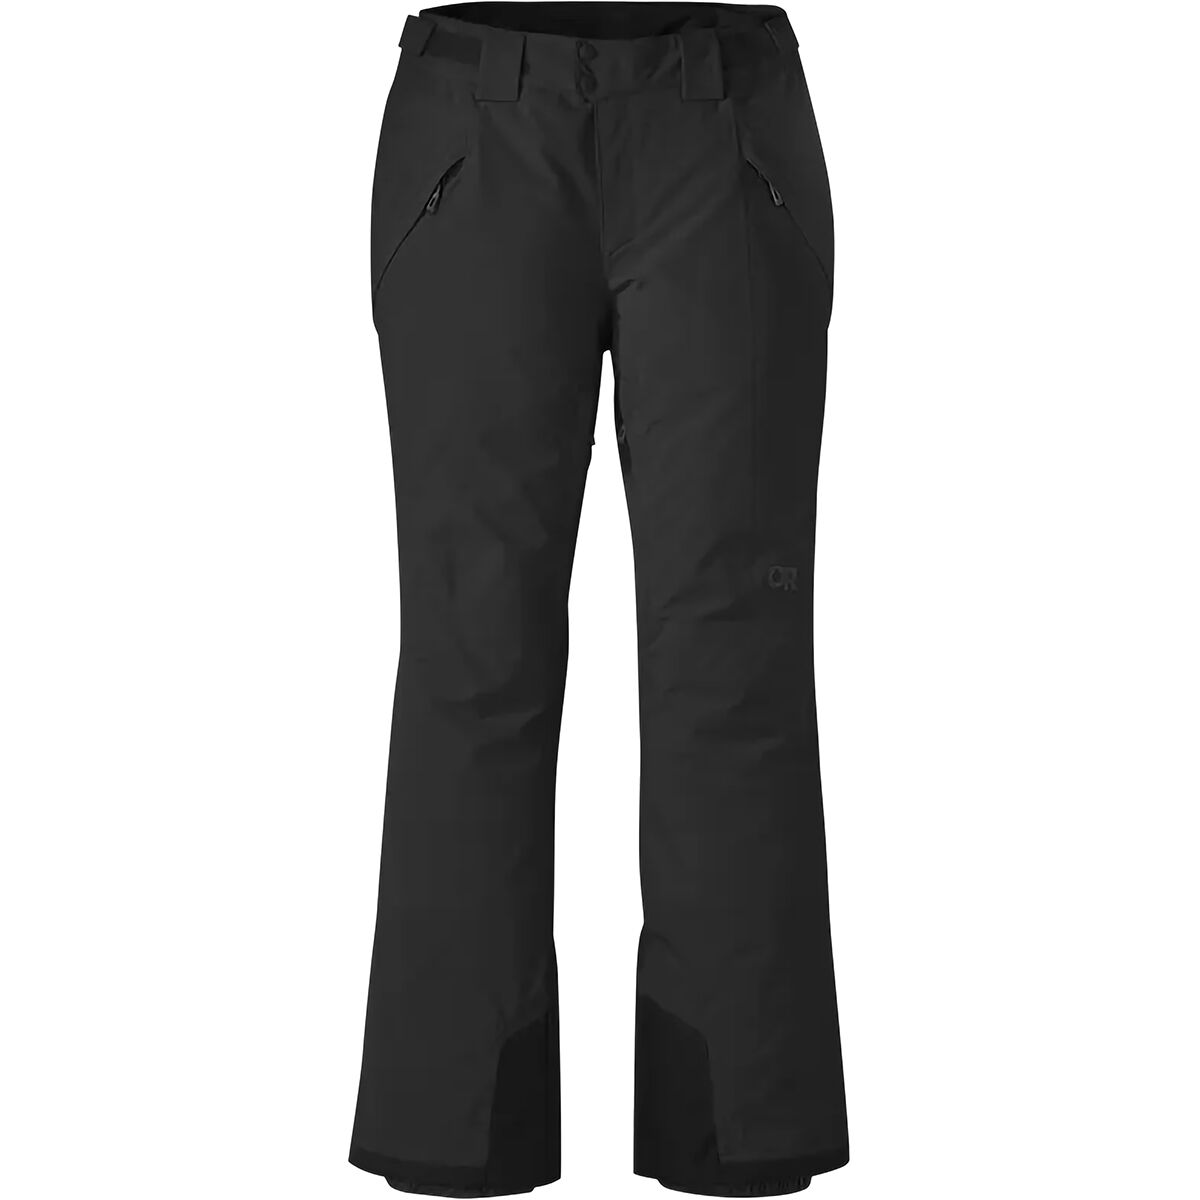 The warmest pants I've ever owned: These ultra-insulated sweats got me  through a winter in Iceland